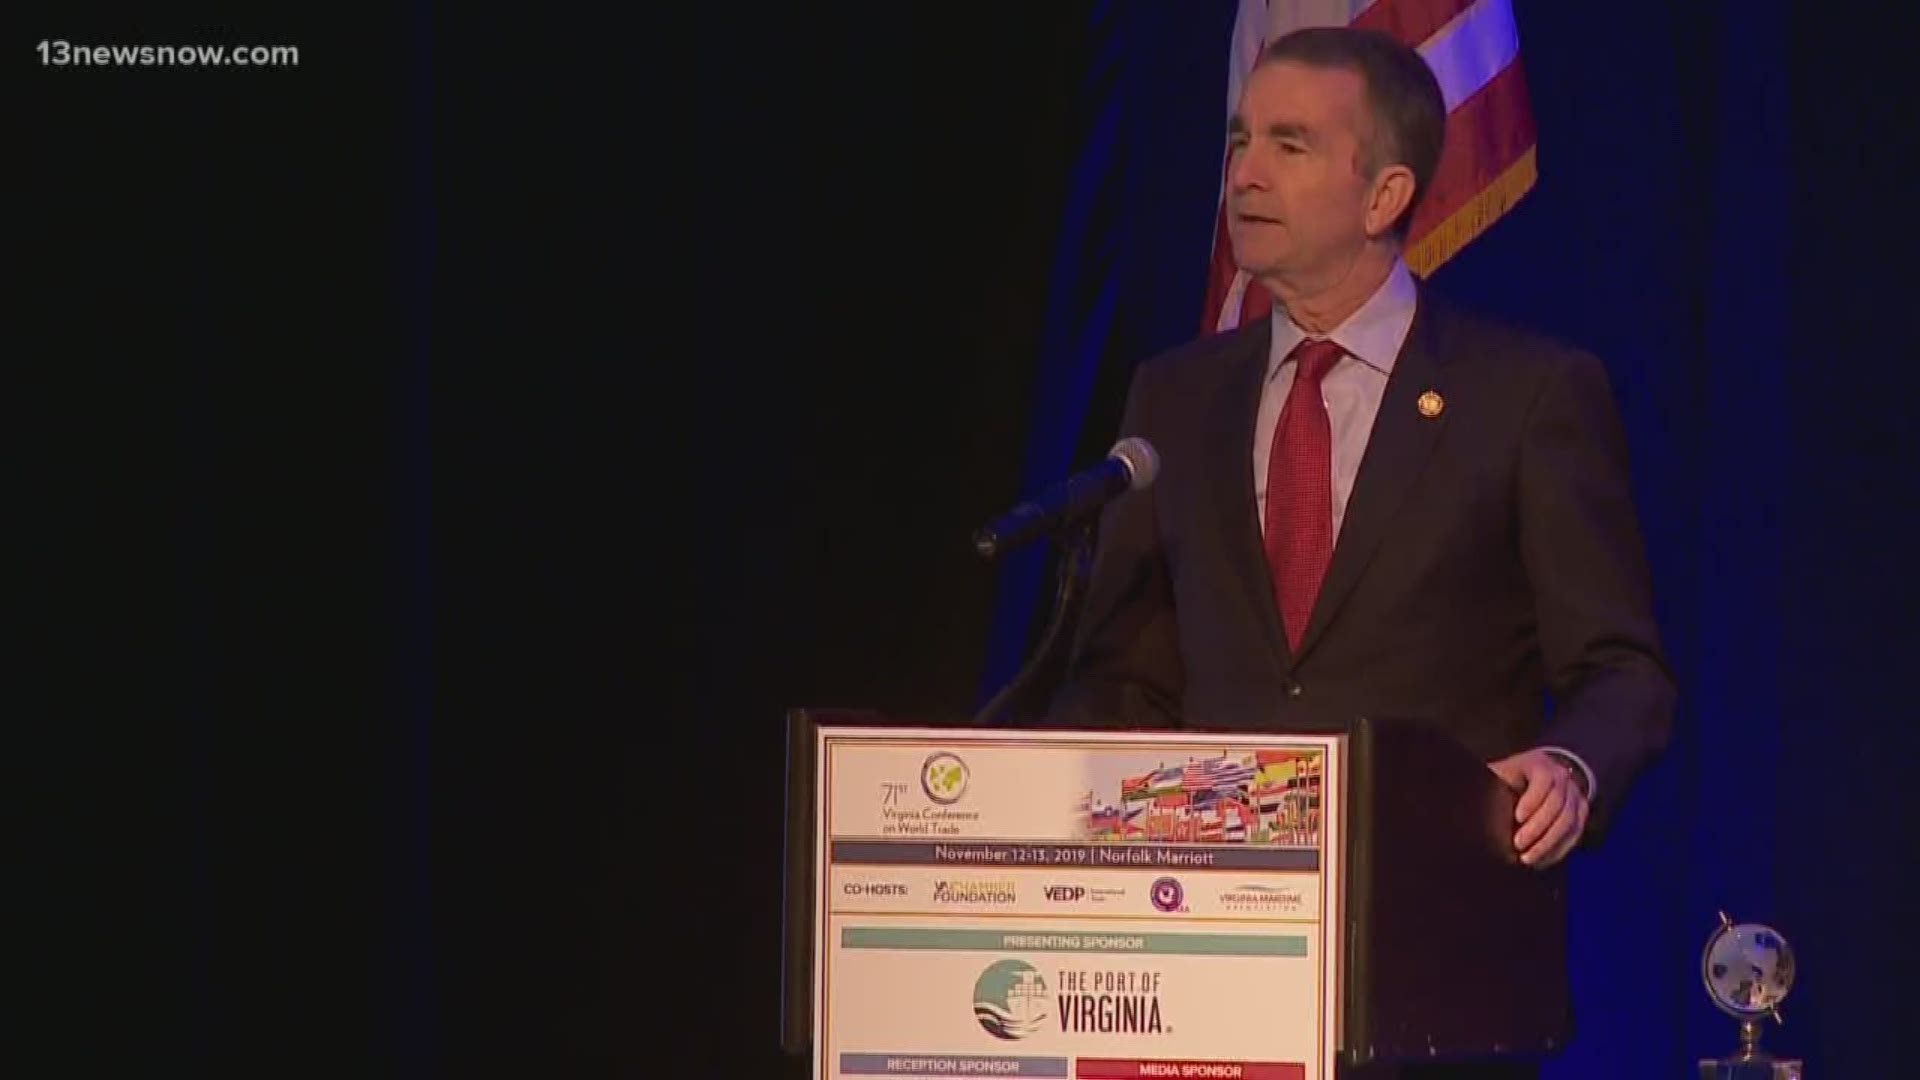 Northam announced Virginia's first comprehensive international trade strategic plan. It lays out a goal to expand the state's trade output by 50% over 15 years.